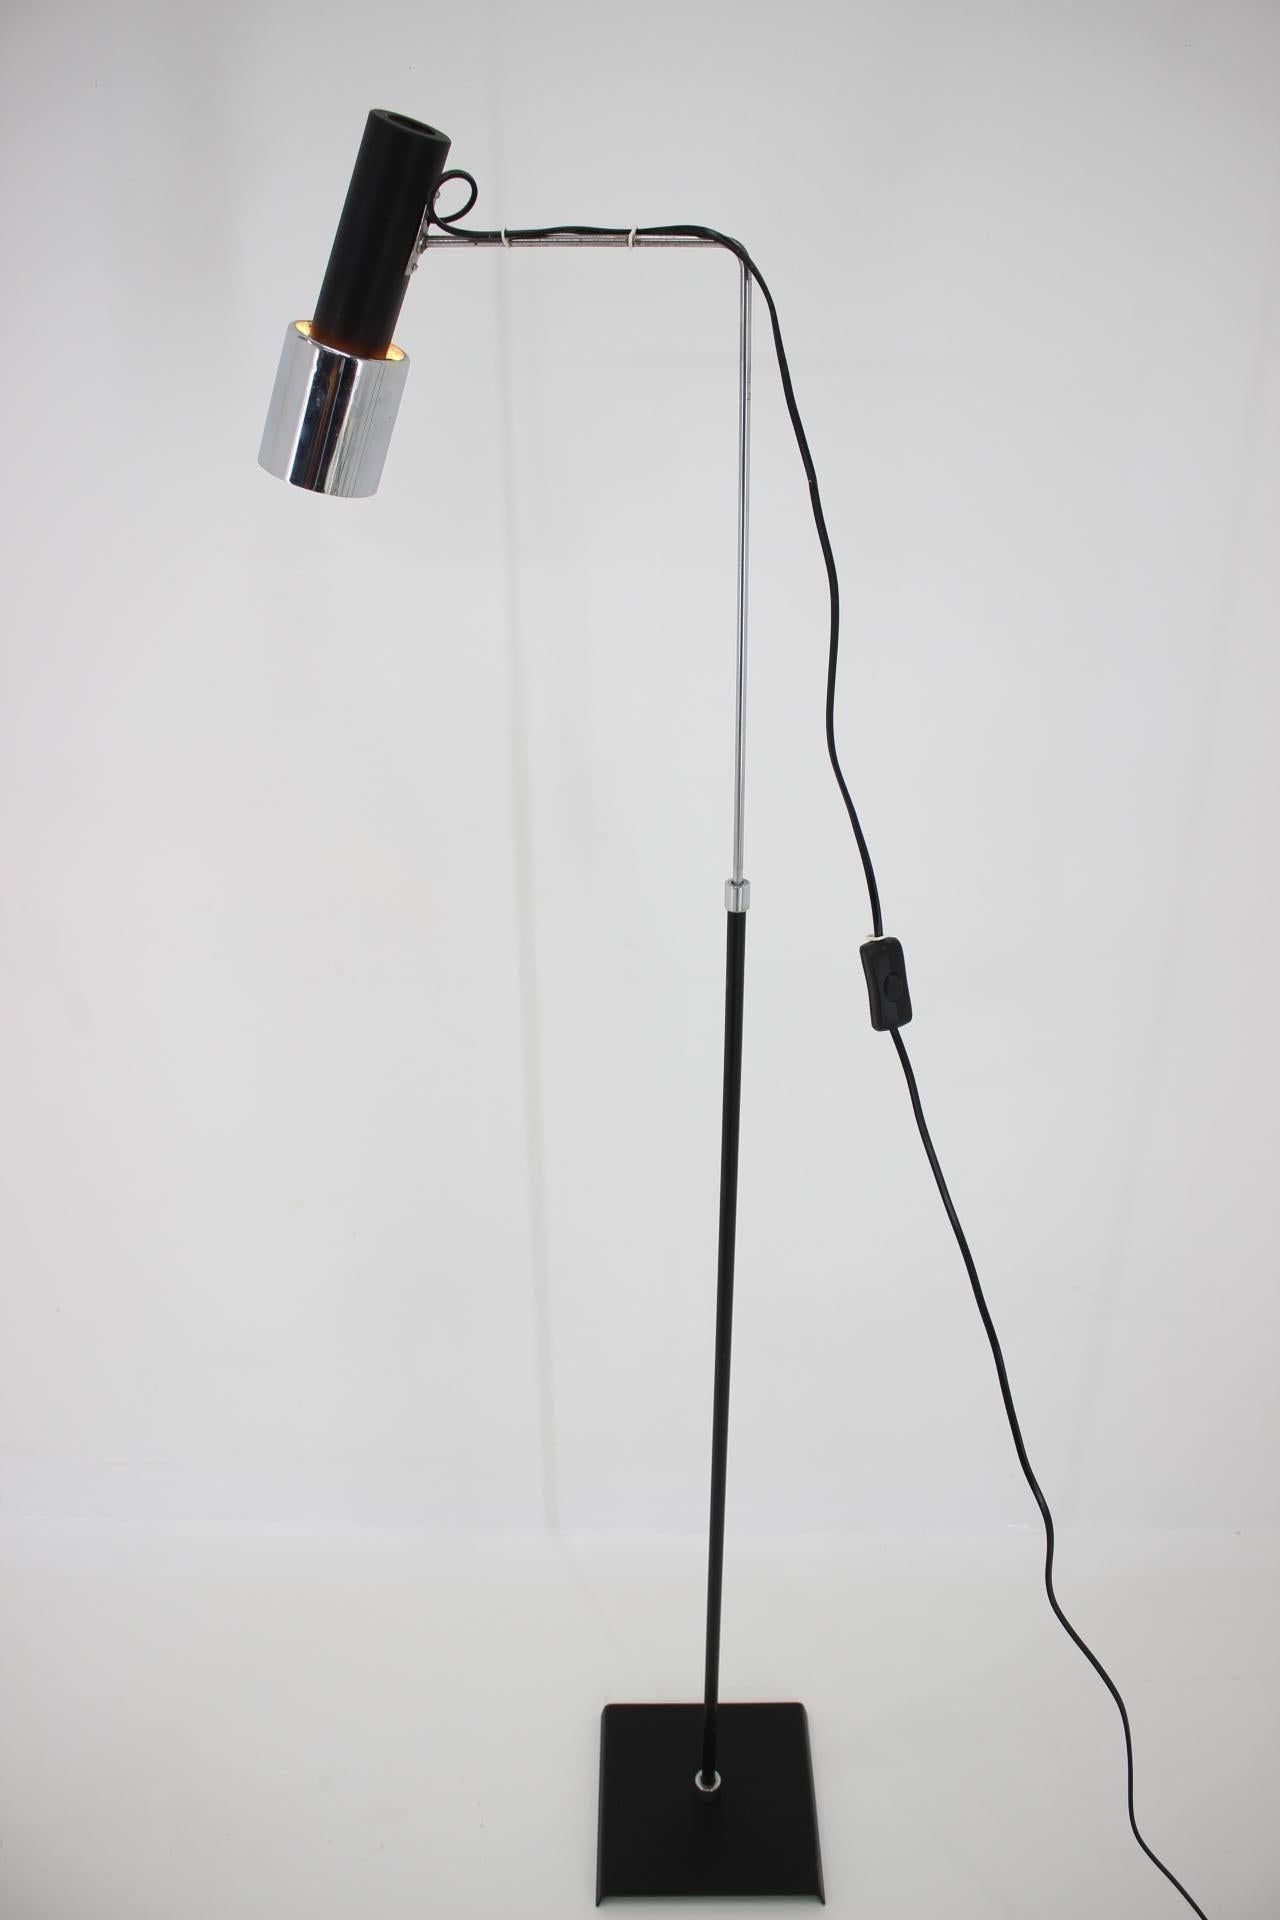 Rare Midcentury Design Set of Floor and Table Lamp, 1960s / Czechoslovakia For Sale 3